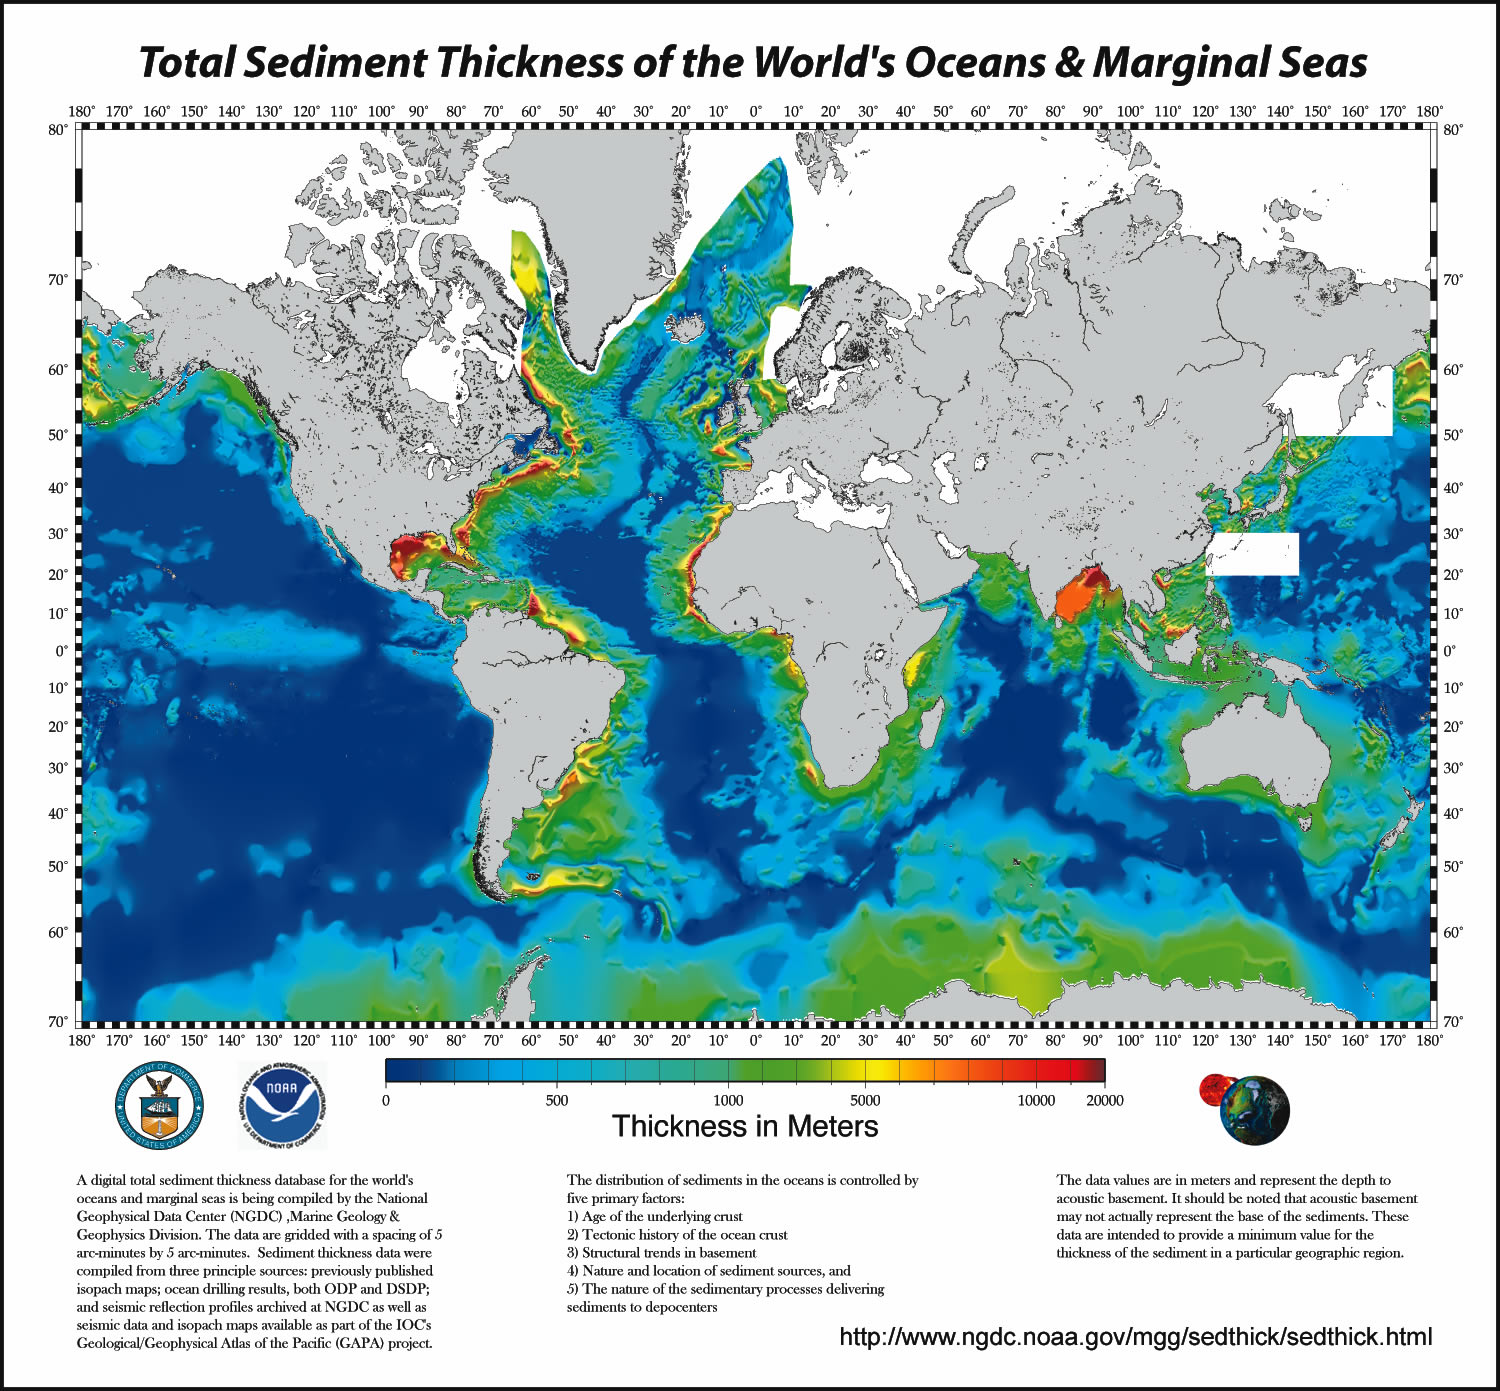 Figure 4.10 Map of global sediment thickness. [Source: NOAA, http://1.usa.gov/1Ywxxz6]